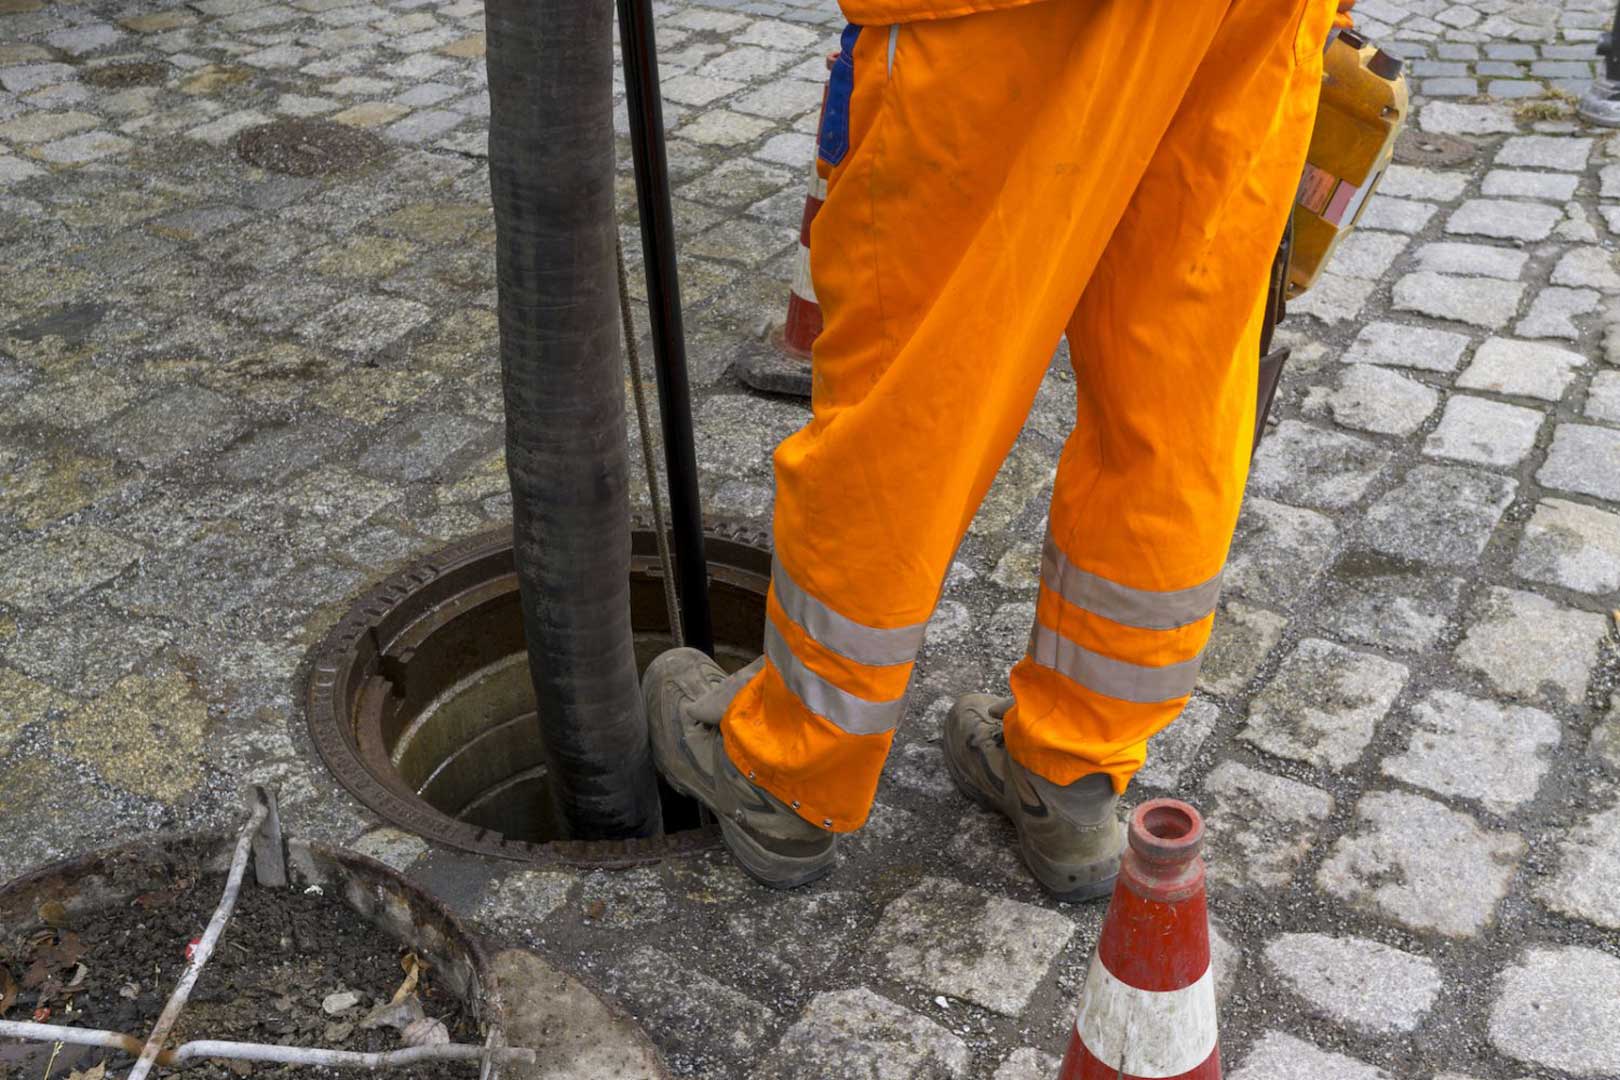 Sewerage worker on cobblestone street cleaning manhole with hydrovac